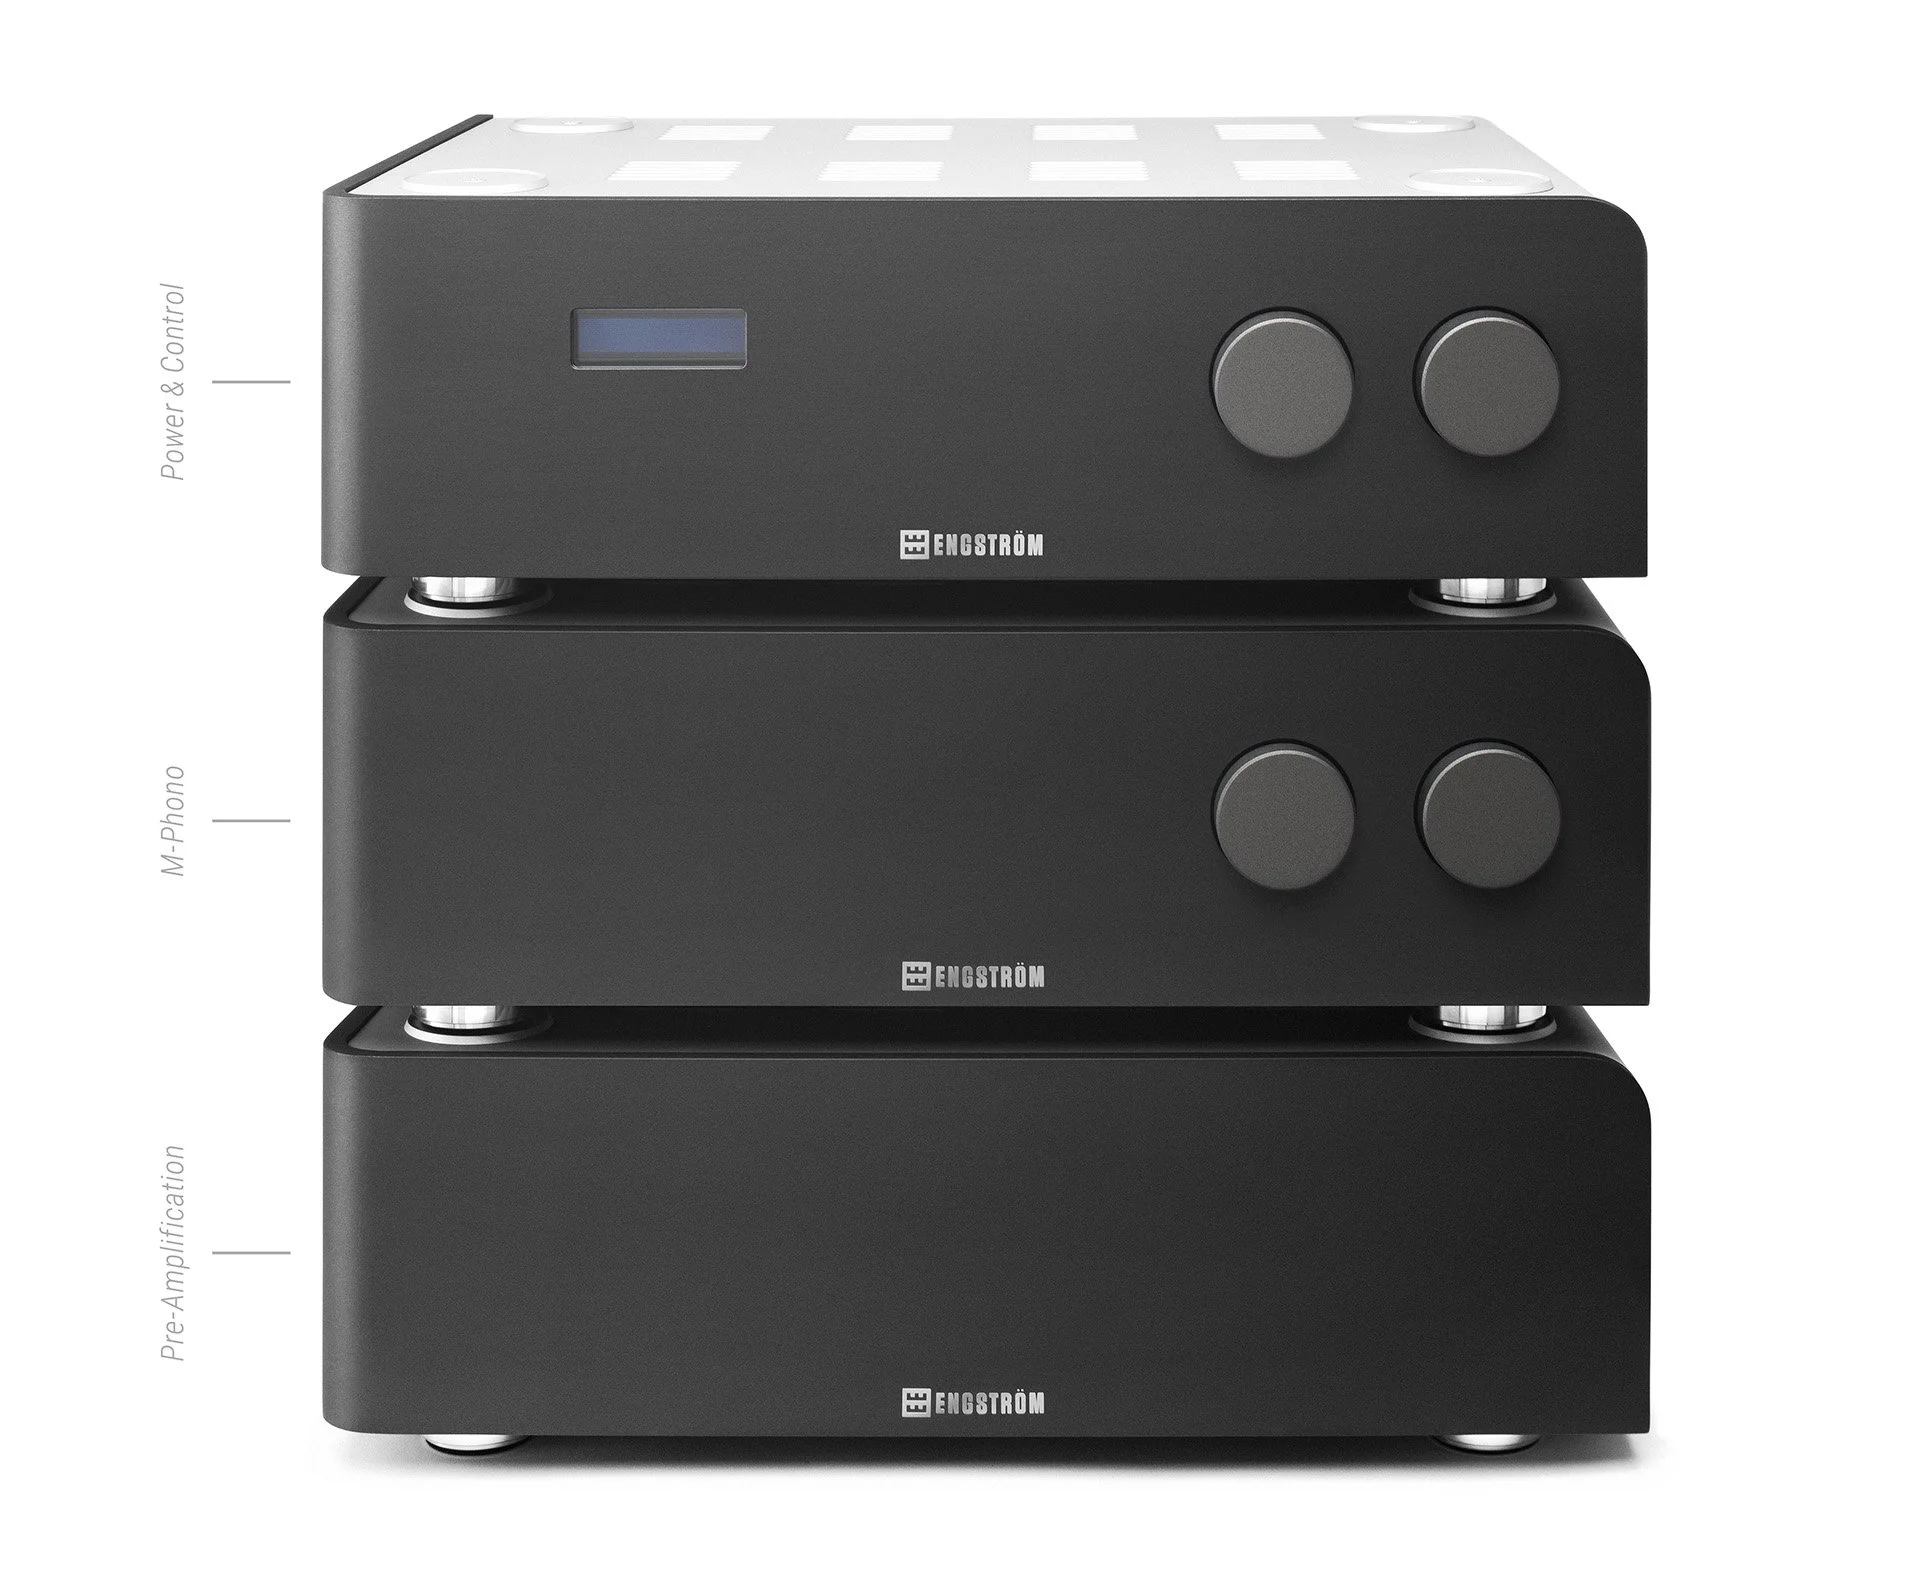 Engstrom MONICA Preamplifier and Phono Stage